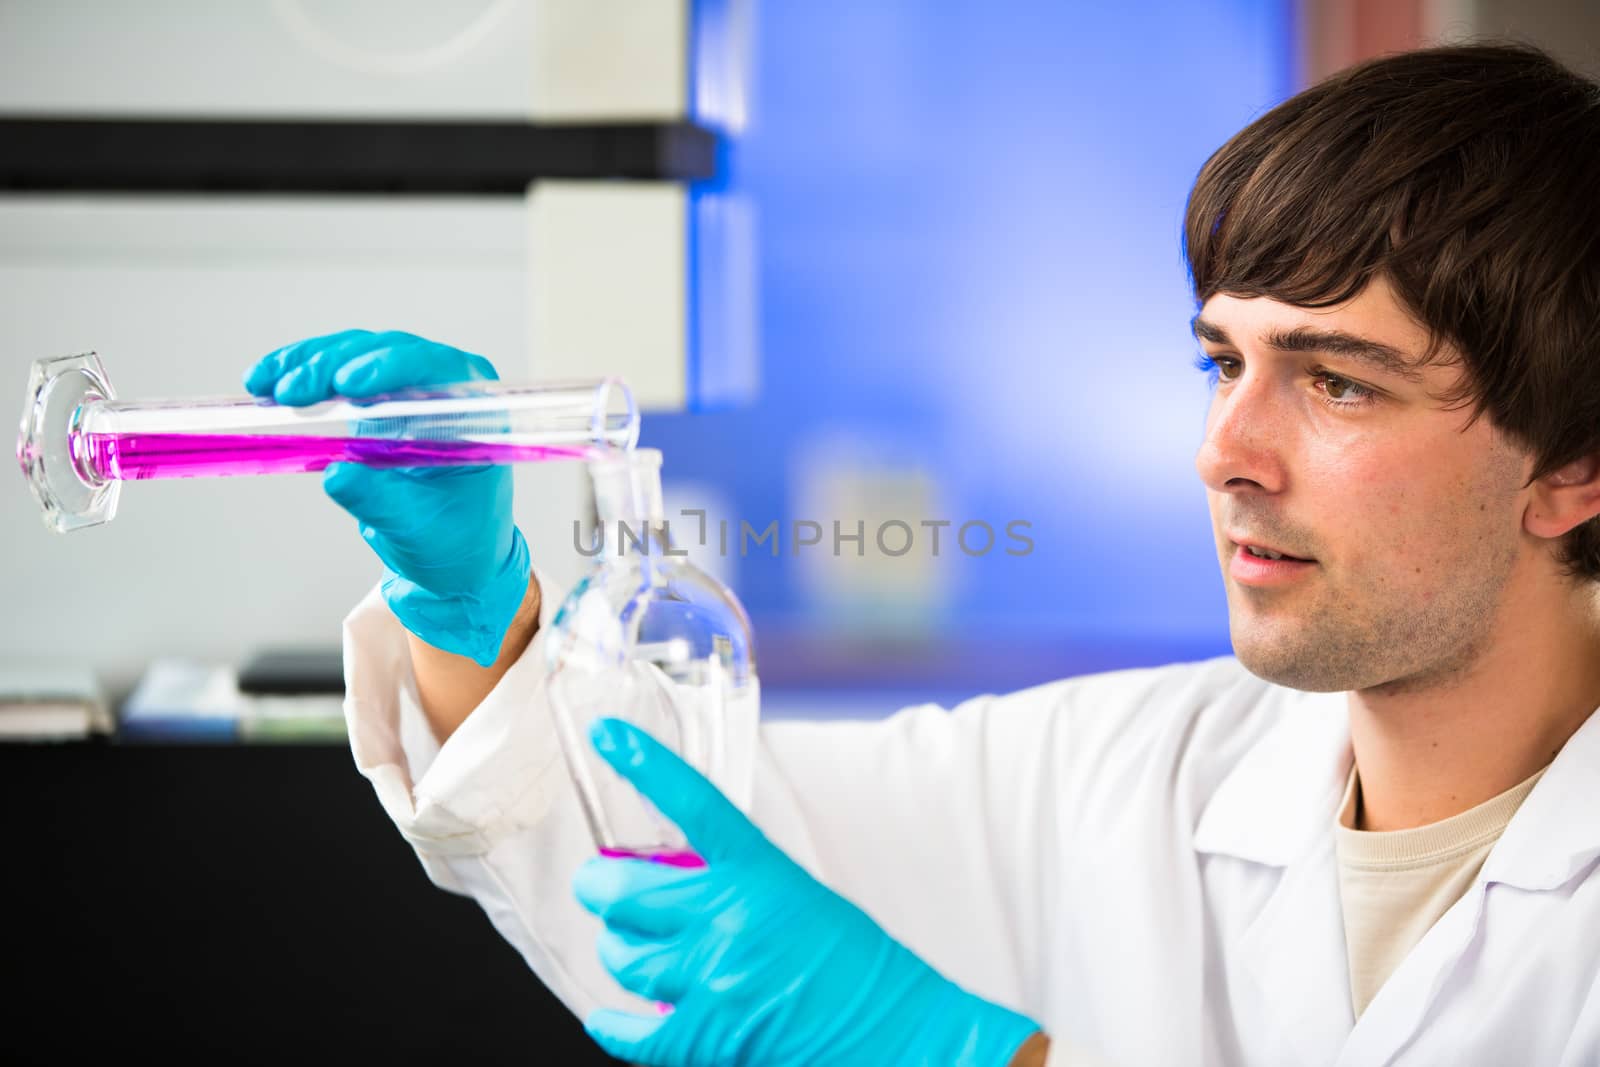 Young male researcher carrying out scientific research in a lab (shallow DOF; color toned image)